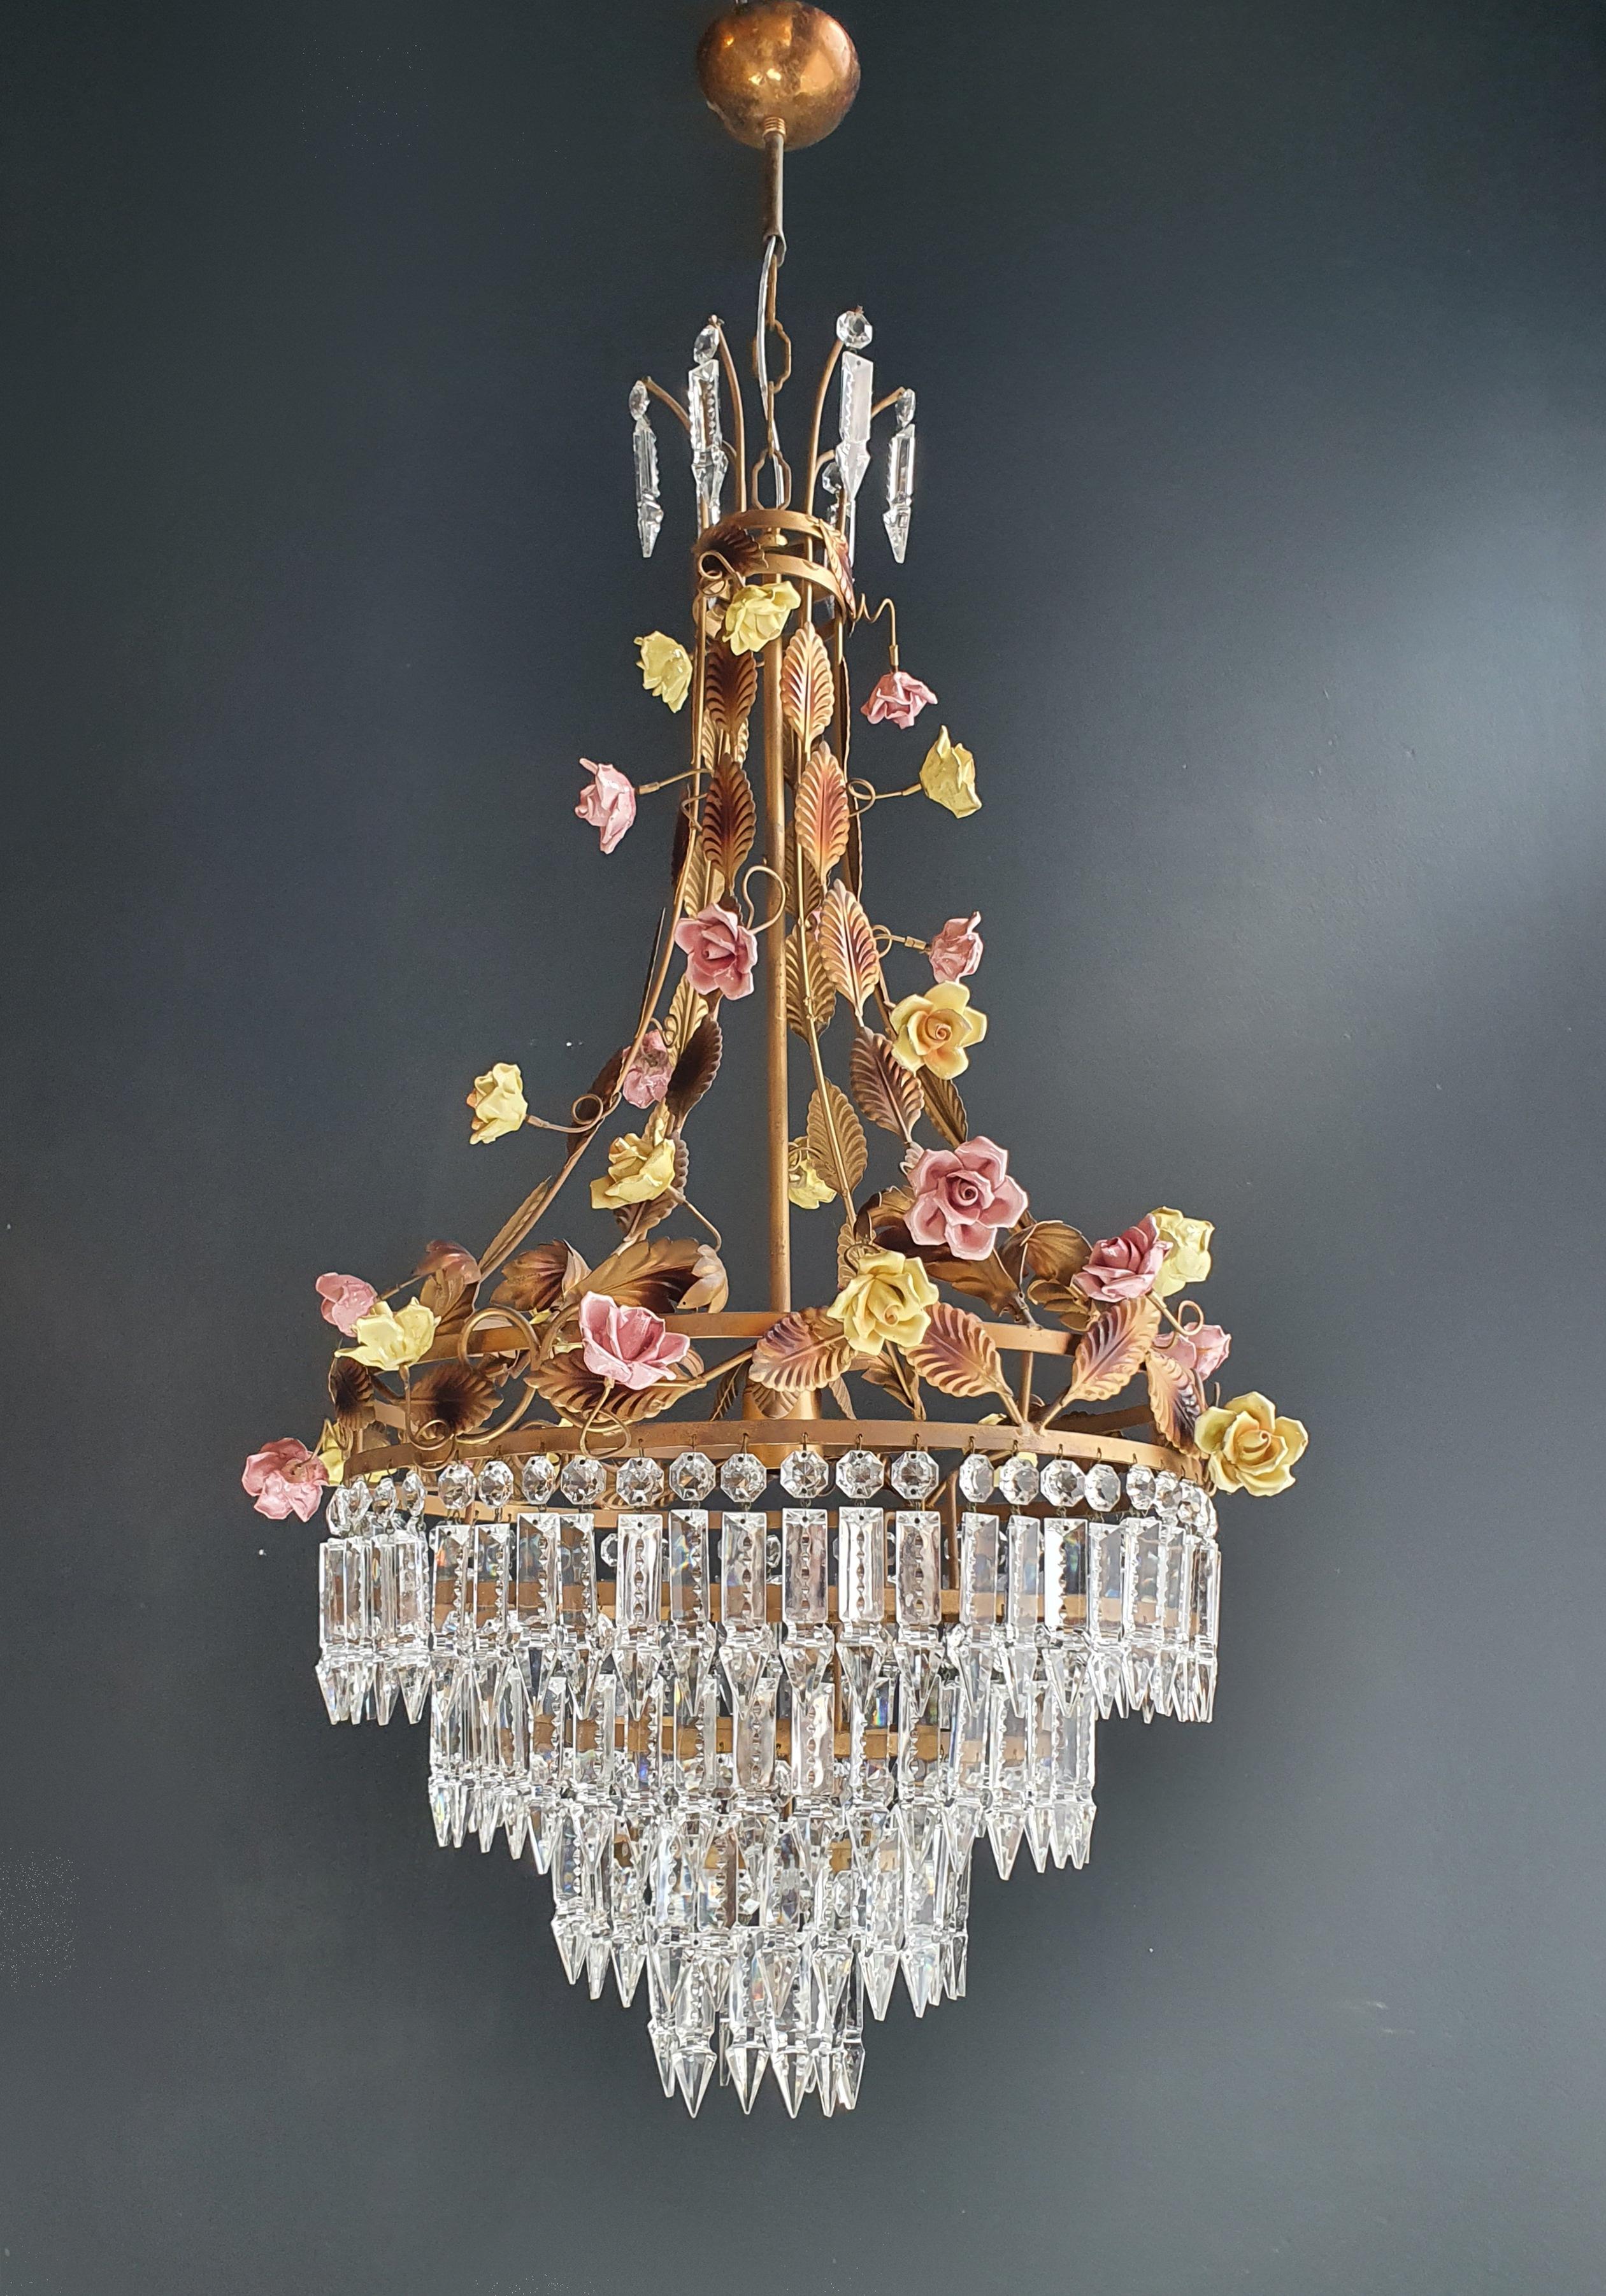 Handcrafted Porcelain Roses in an Array of Colors Adorn this Exquisite Piece

Indulge in the allure of our meticulously crafted chandelier, adorned with delicate porcelain roses in a variety of enchanting hues. Each porcelain rose has been